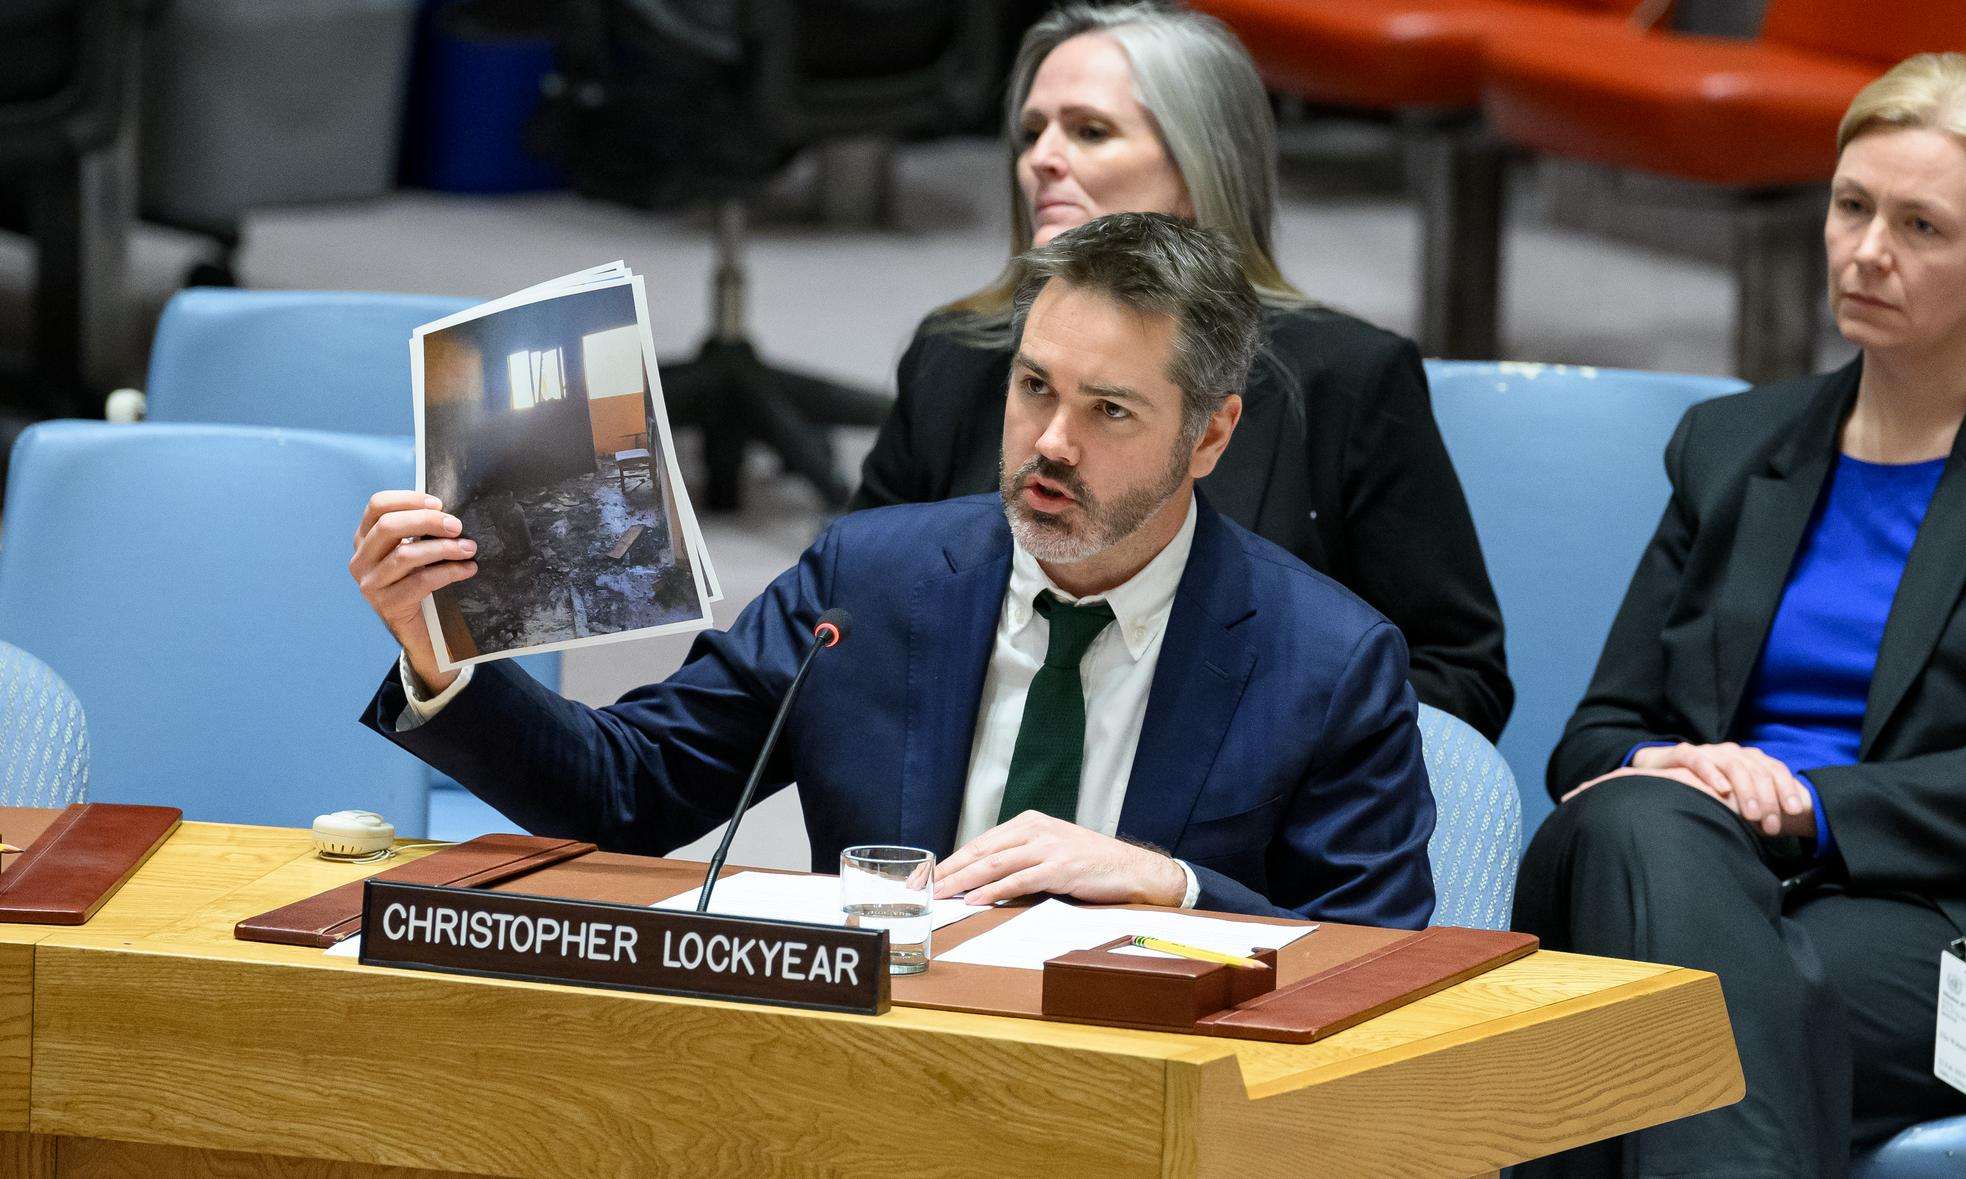 MSF secretary general Christopher Lockyear gives an address at the UN Security Council about Gaza.